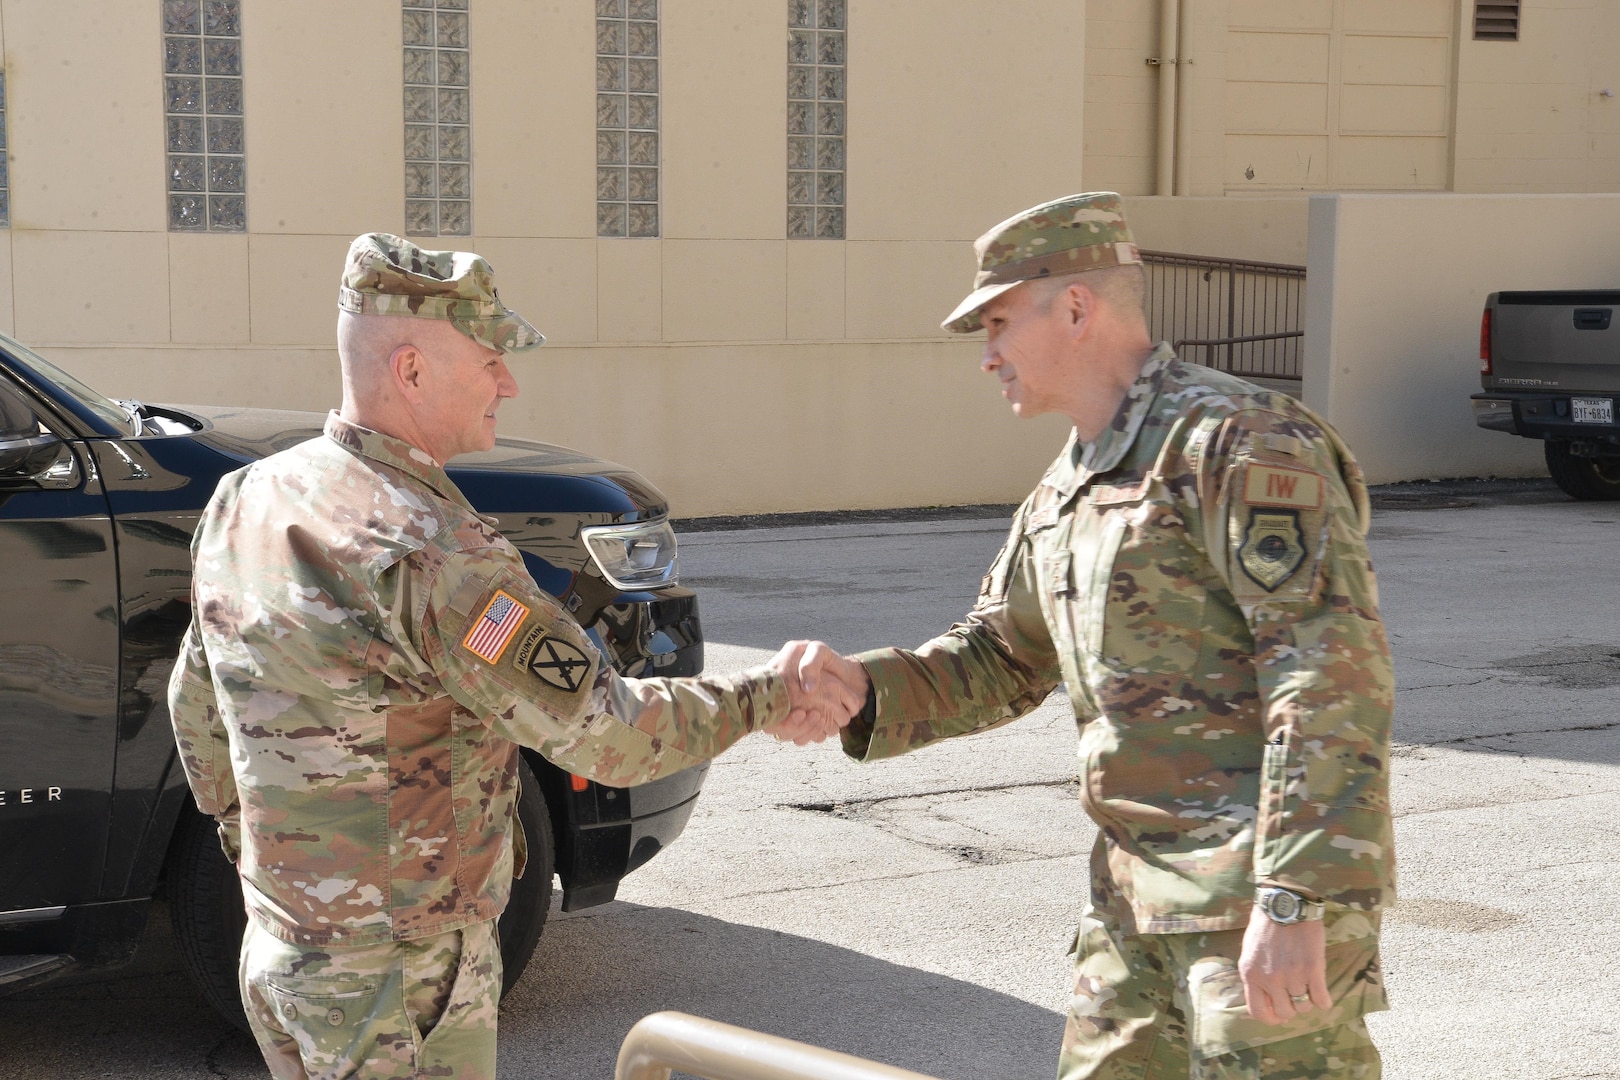 A photo of U.S. military leadership shaking hands